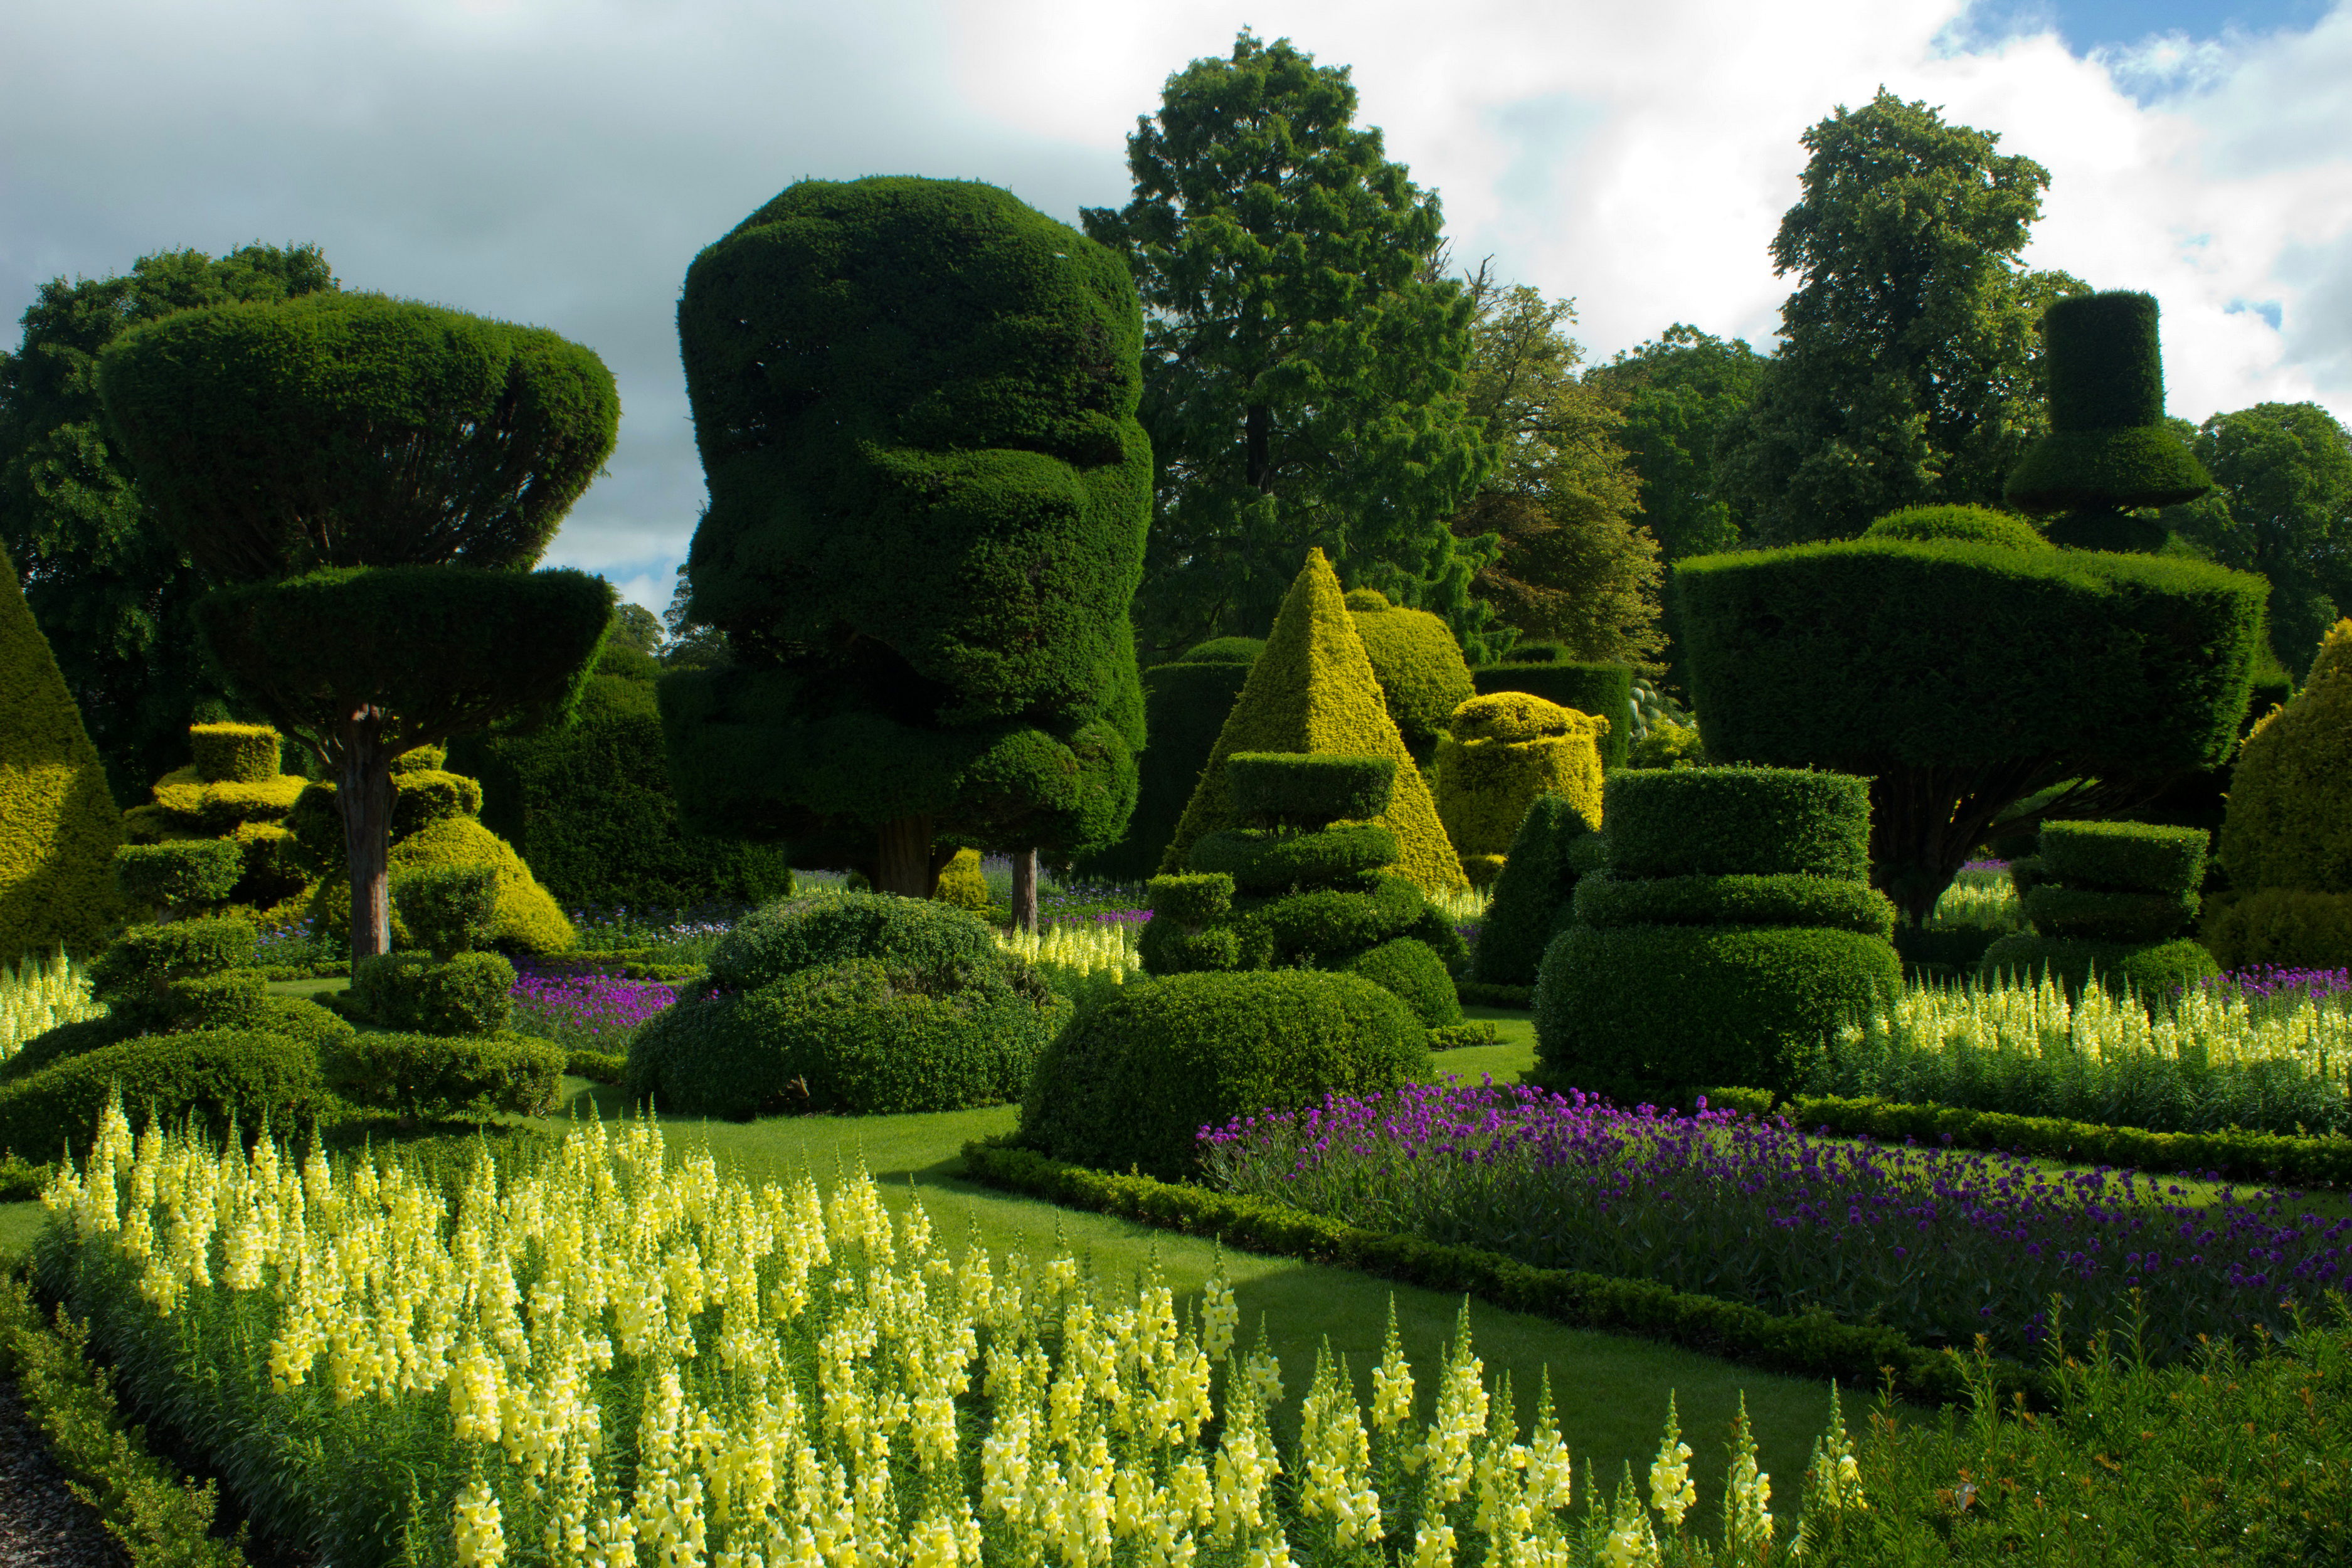 Widescreen image nature, lawns, bodnant gardens wales, great britain